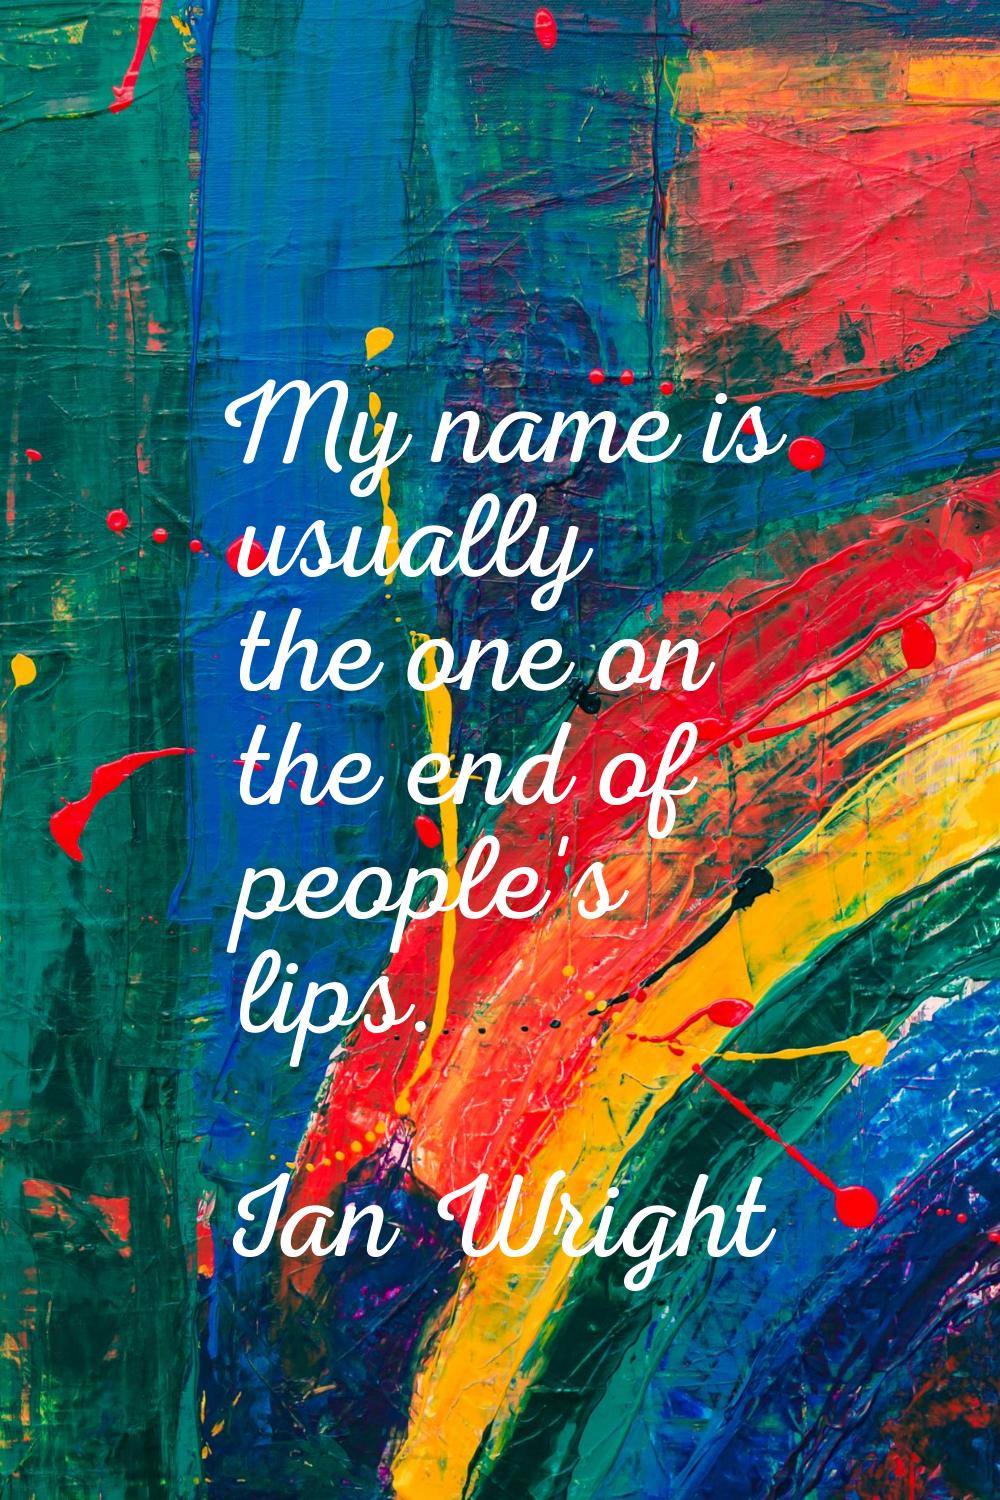 My name is usually the one on the end of people's lips.